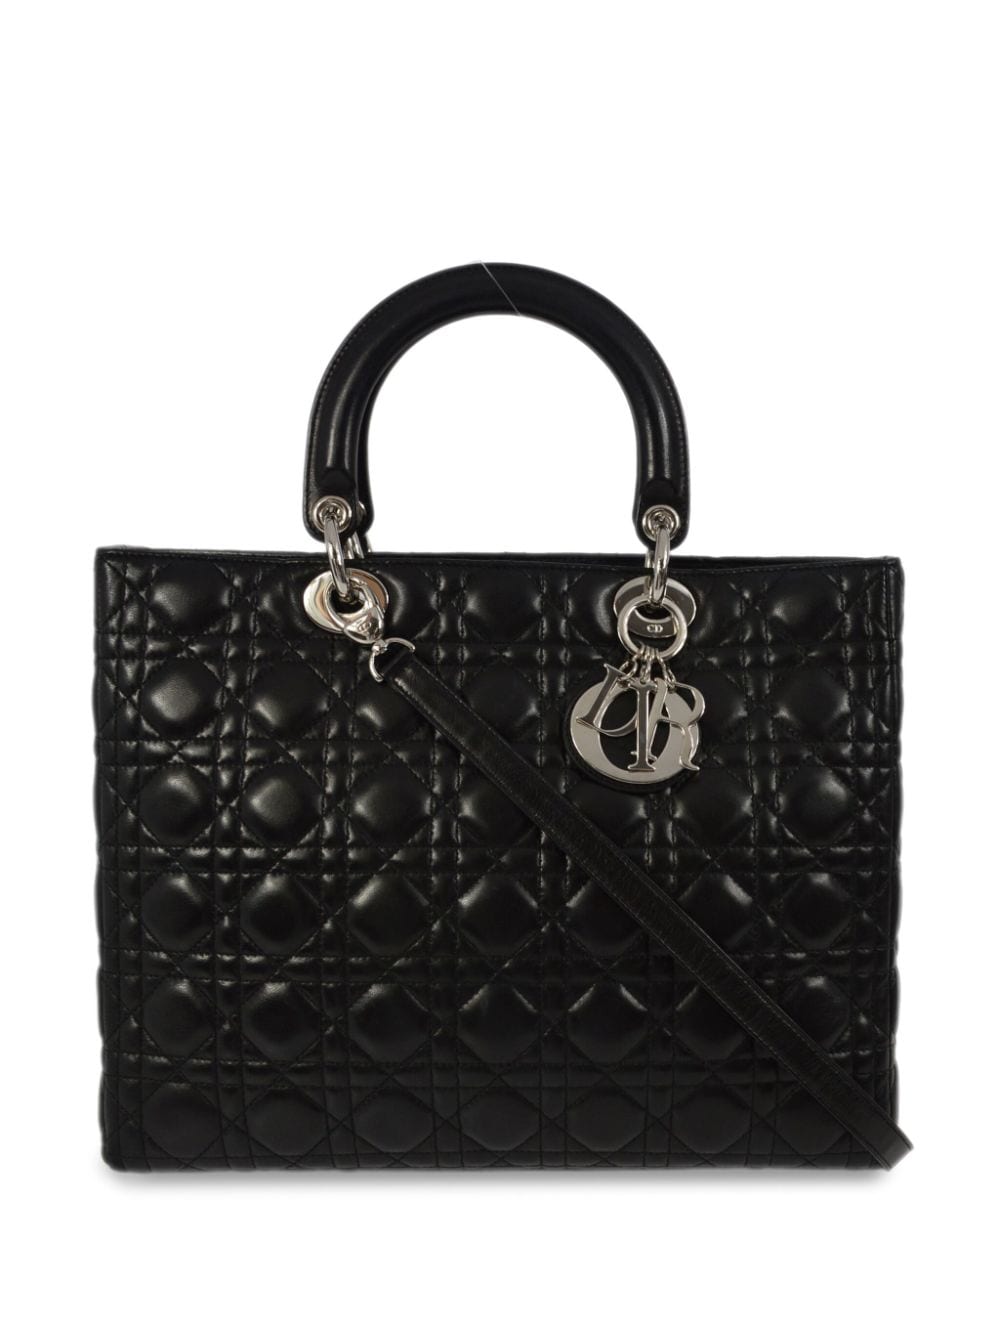 Christian Dior Pre-Owned 2004 Cannage Lady Dior two-way handbag - Black von Christian Dior Pre-Owned